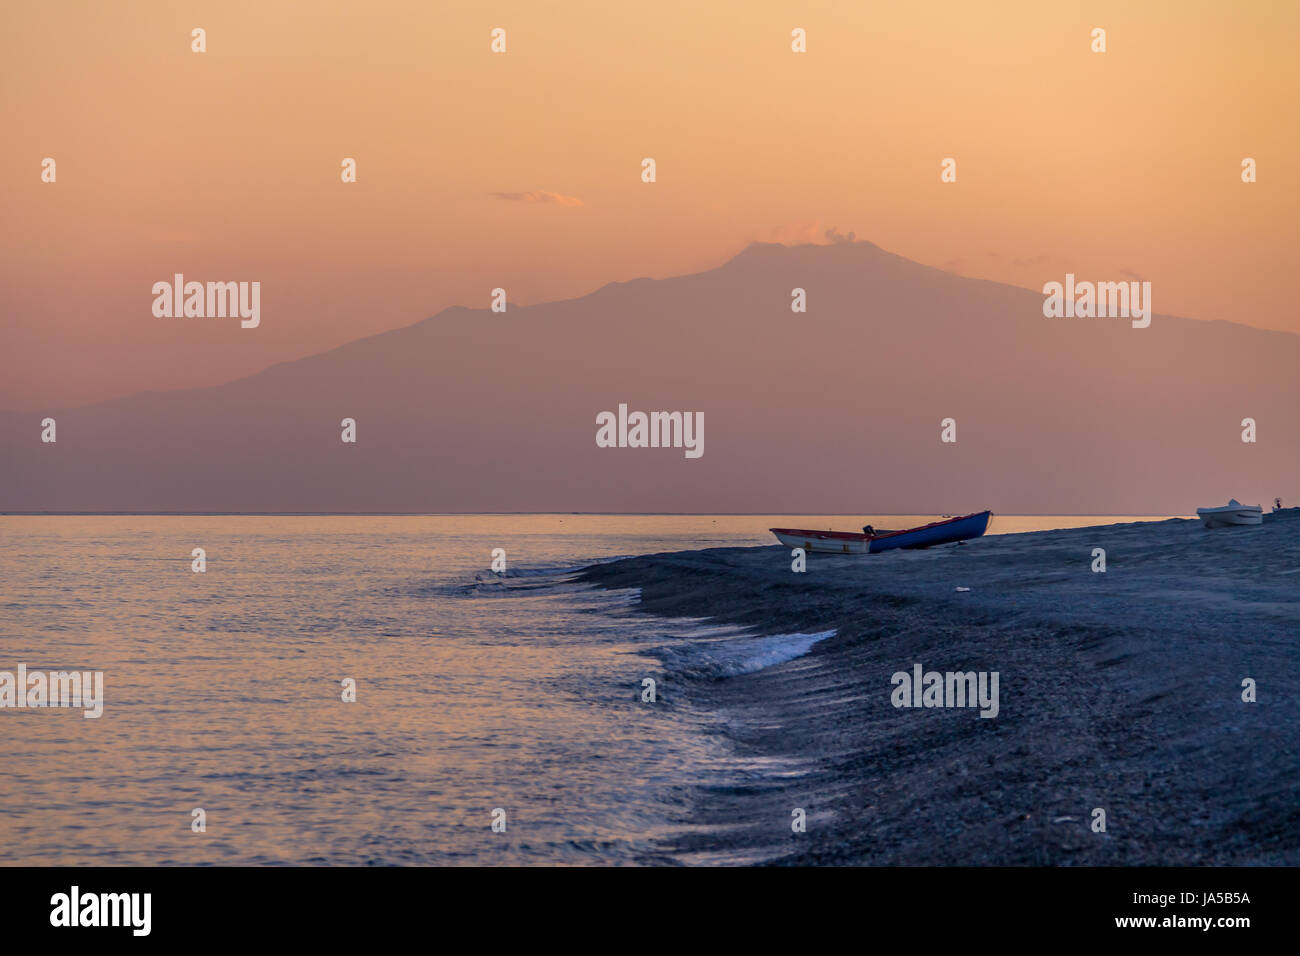 Sunset on a Mediterranean beach of Ionian Sea with Mount Etna Volcano on background - Bova Marina, Calabria, Italy Stock Photo